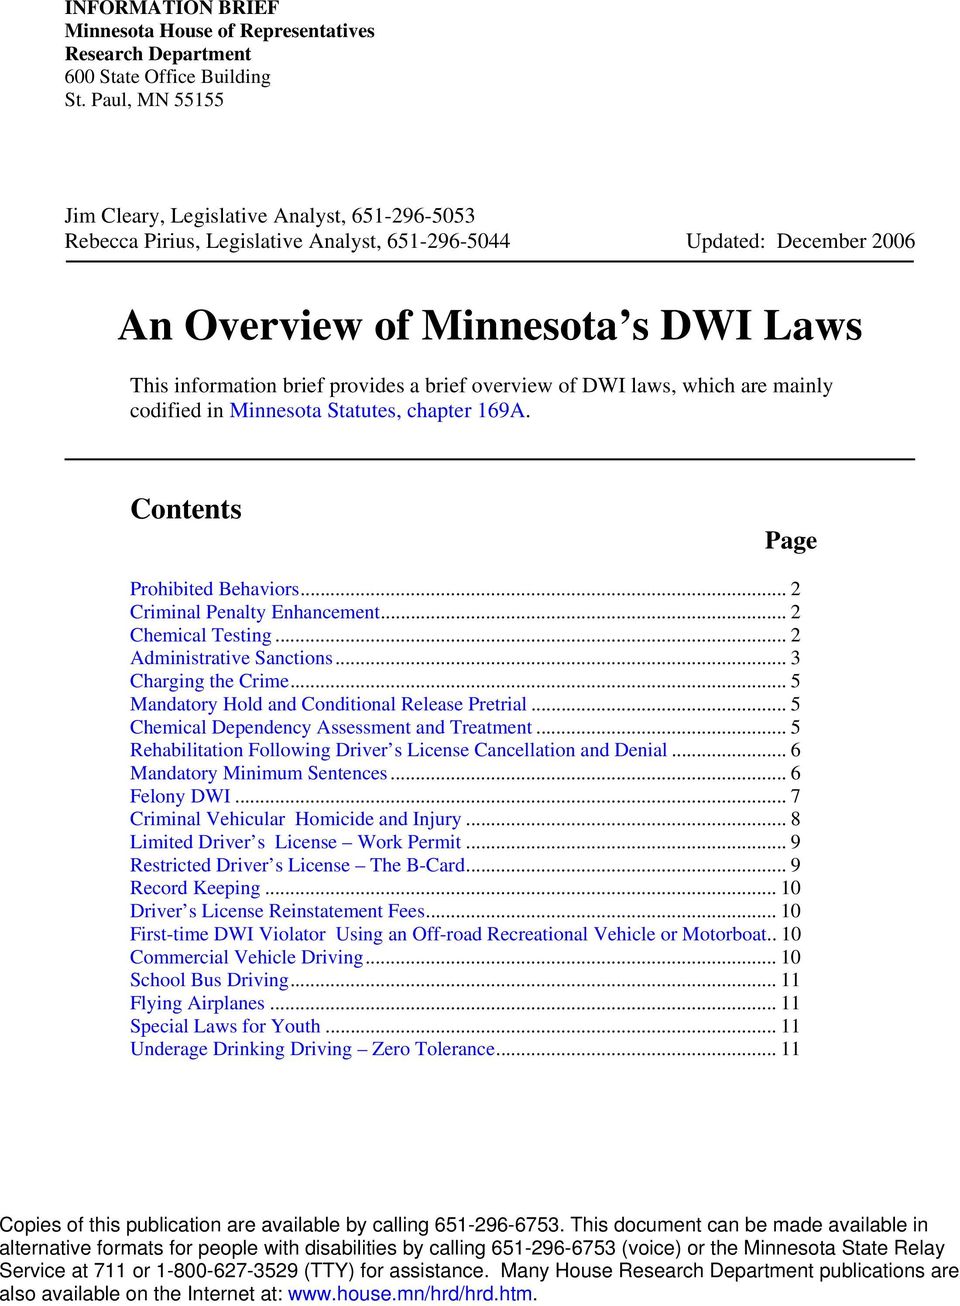 provides a brief overview of DWI laws, which are mainly codified in Minnesota Statutes, chapter 169A. Contents Page Prohibited Behaviors... 2 Criminal Penalty Enhancement... 2 Chemical Testing.